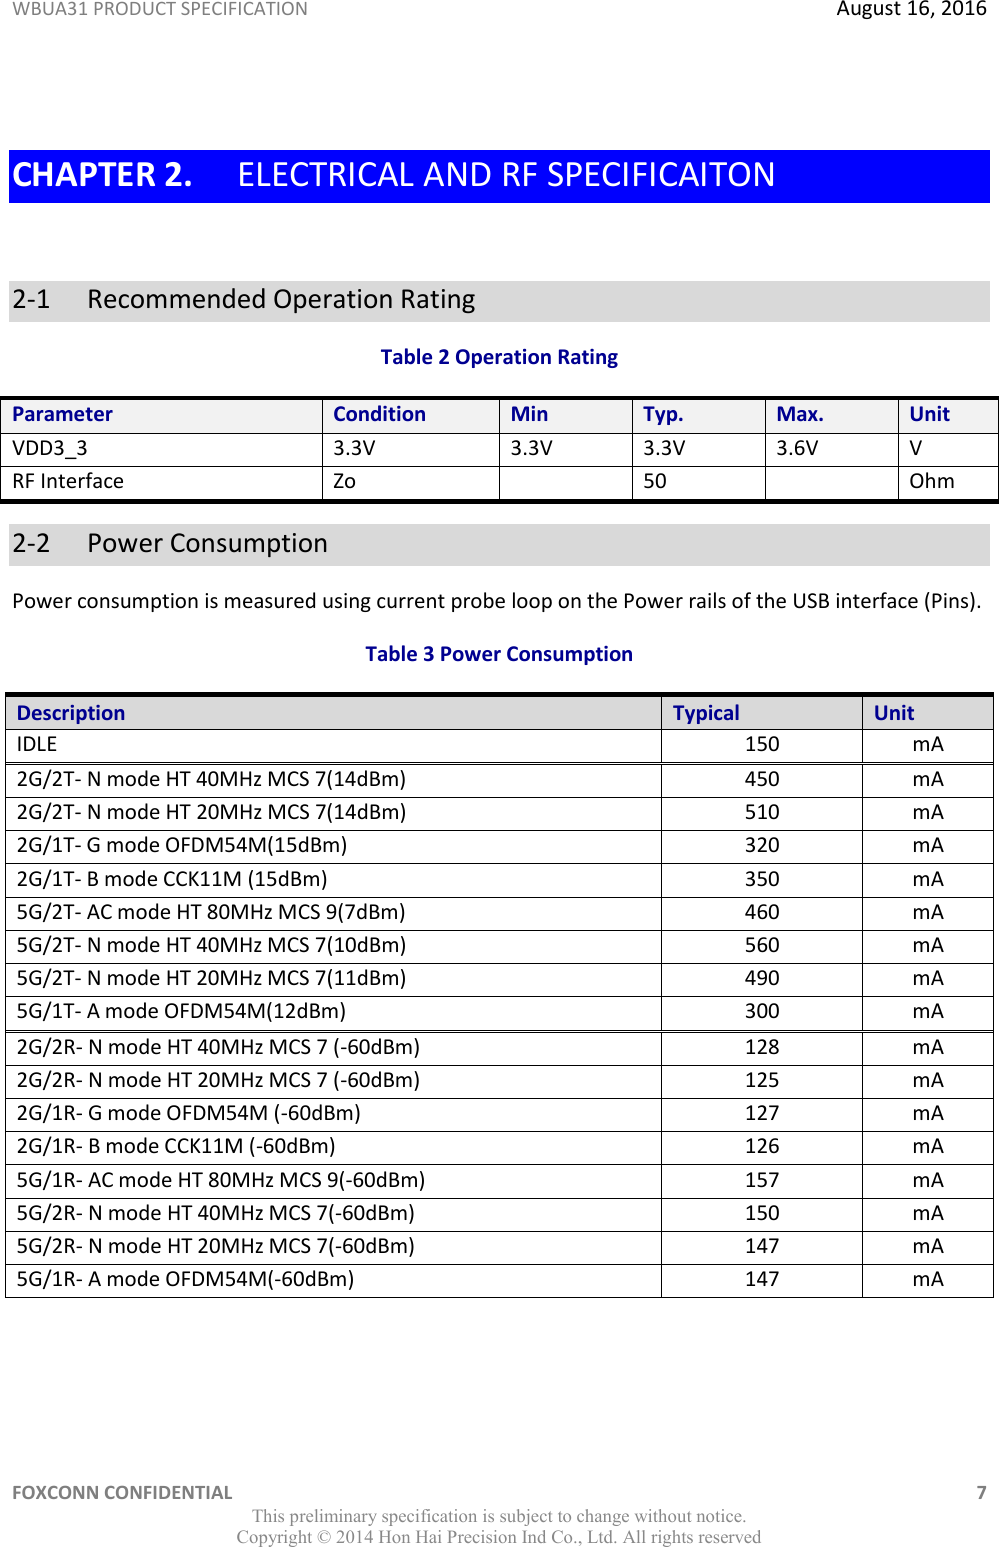 WBUA31 PRODUCT SPECIFICATION  August 16, 2016 FOXCONN CONFIDENTIAL    7 This preliminary specification is subject to change without notice. Copyright ©  2014 Hon Hai Precision Ind Co., Ltd. All rights reserved  CHAPTER 2. ELECTRICAL AND RF SPECIFICAITON  2-1   Recommended Operation Rating Table 2 Operation Rating Parameter Condition Min Typ. Max. Unit VDD3_3 3.3V 3.3V 3.3V 3.6V V RF Interface Zo  50  Ohm 2-2   Power Consumption Power consumption is measured using current probe loop on the Power rails of the USB interface (Pins). Table 3 Power Consumption Description Typical Unit IDLE 150 mA 2G/2T- N mode HT 40MHz MCS 7(14dBm) 450 mA 2G/2T- N mode HT 20MHz MCS 7(14dBm) 510 mA 2G/1T- G mode OFDM54M(15dBm) 320 mA 2G/1T- B mode CCK11M (15dBm) 350 mA 5G/2T- AC mode HT 80MHz MCS 9(7dBm) 460 mA 5G/2T- N mode HT 40MHz MCS 7(10dBm) 560 mA 5G/2T- N mode HT 20MHz MCS 7(11dBm) 490 mA 5G/1T- A mode OFDM54M(12dBm) 300 mA 2G/2R- N mode HT 40MHz MCS 7 (-60dBm) 128 mA 2G/2R- N mode HT 20MHz MCS 7 (-60dBm) 125 mA 2G/1R- G mode OFDM54M (-60dBm) 127 mA 2G/1R- B mode CCK11M (-60dBm) 126 mA 5G/1R- AC mode HT 80MHz MCS 9(-60dBm) 157 mA 5G/2R- N mode HT 40MHz MCS 7(-60dBm) 150 mA 5G/2R- N mode HT 20MHz MCS 7(-60dBm) 147 mA 5G/1R- A mode OFDM54M(-60dBm) 147 mA   